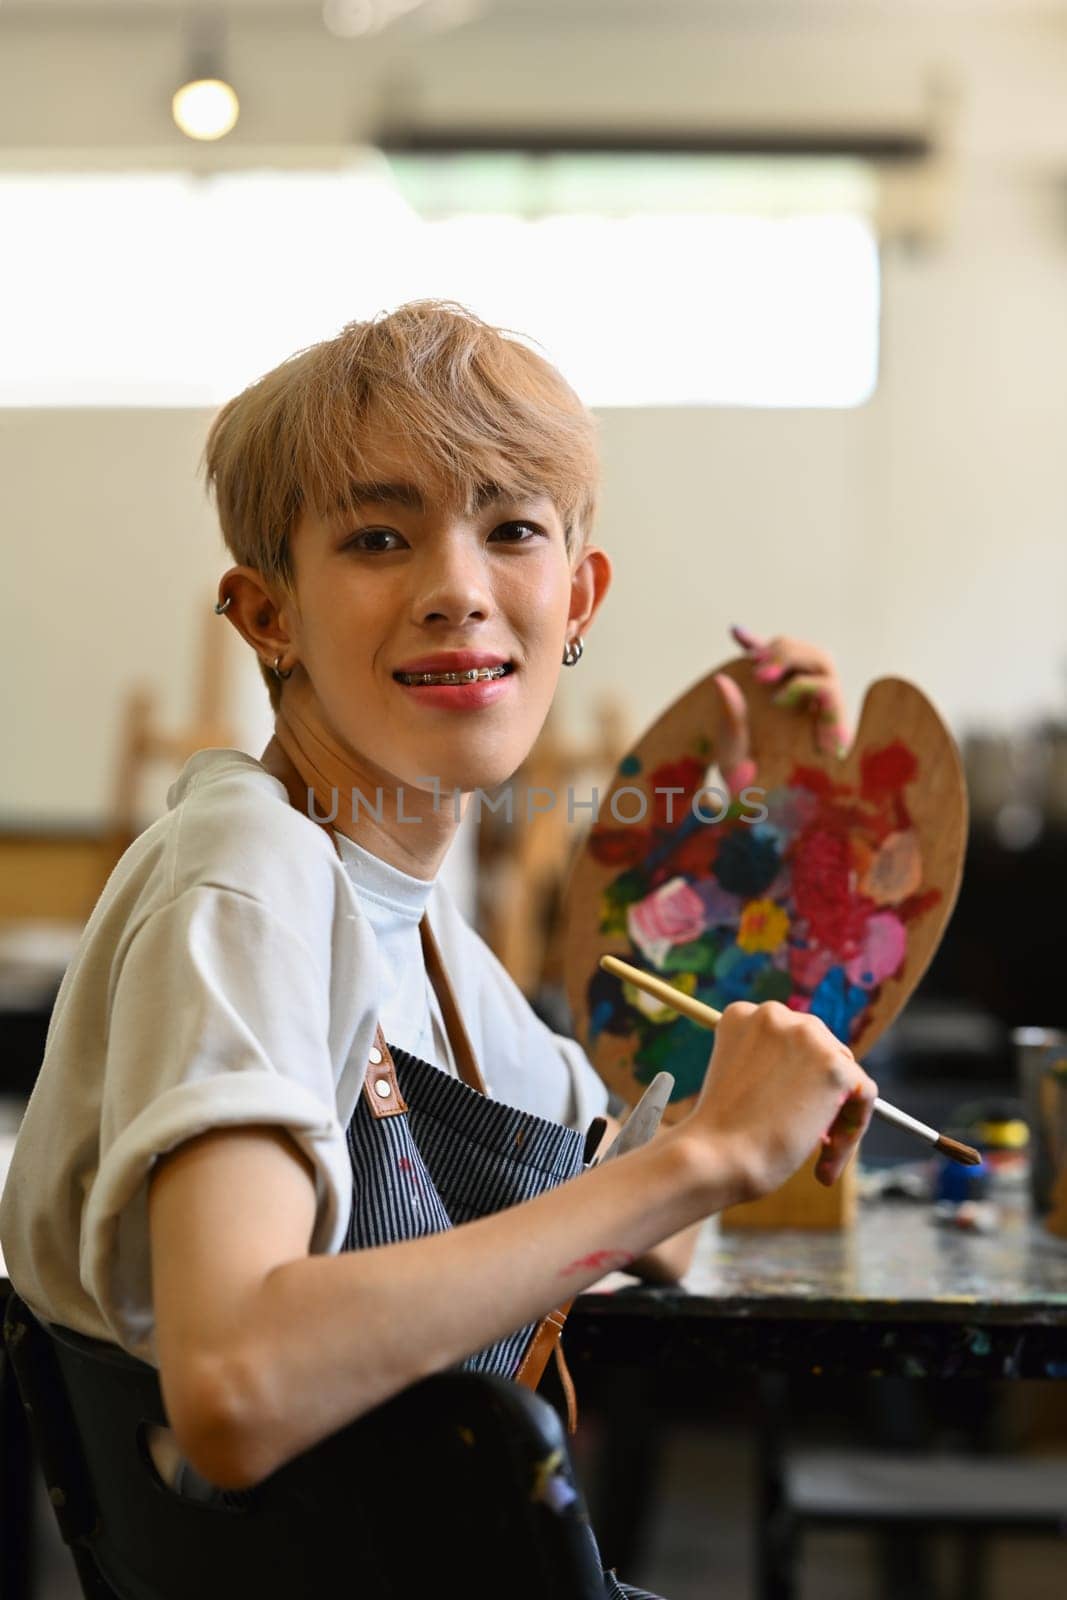 Cheerful young man art school student sitting in workshop holding palette and paintbrush, smiling at camera.